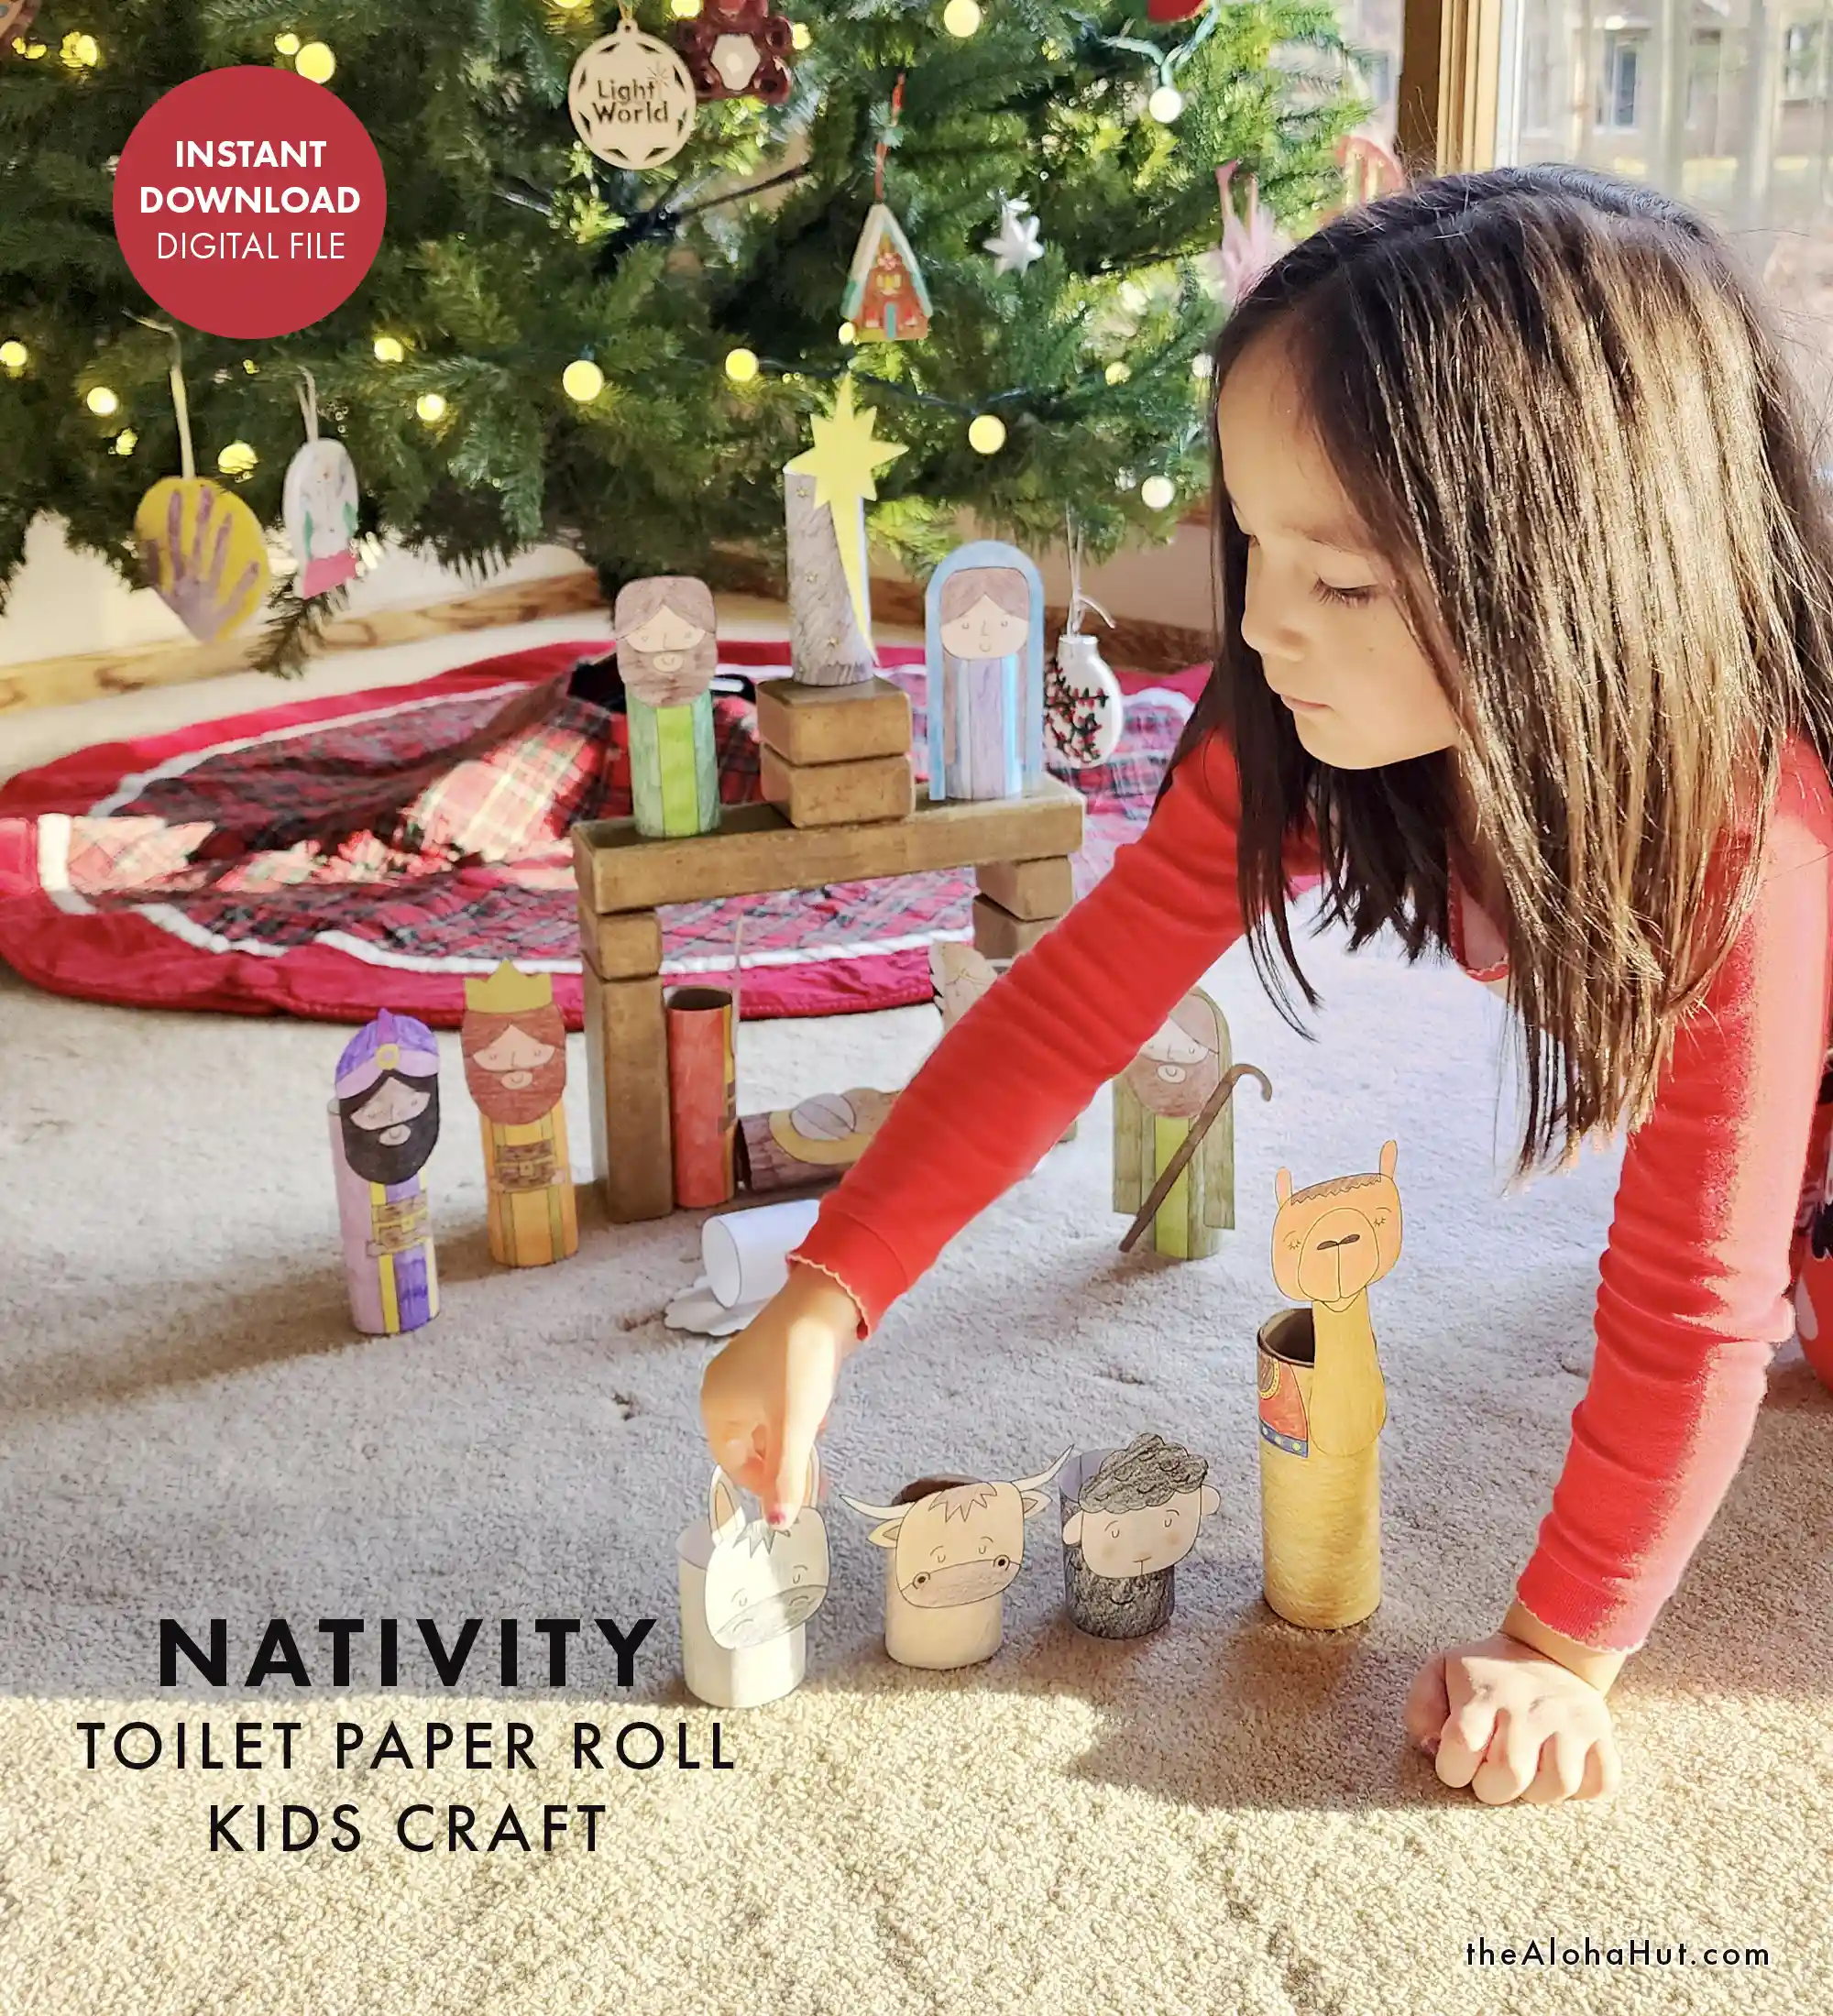 Nativity toilet paper roll craft for a fun and easy kids Christmas craft. Make your own DIY nativity with our printable nativity toilet paper prints.